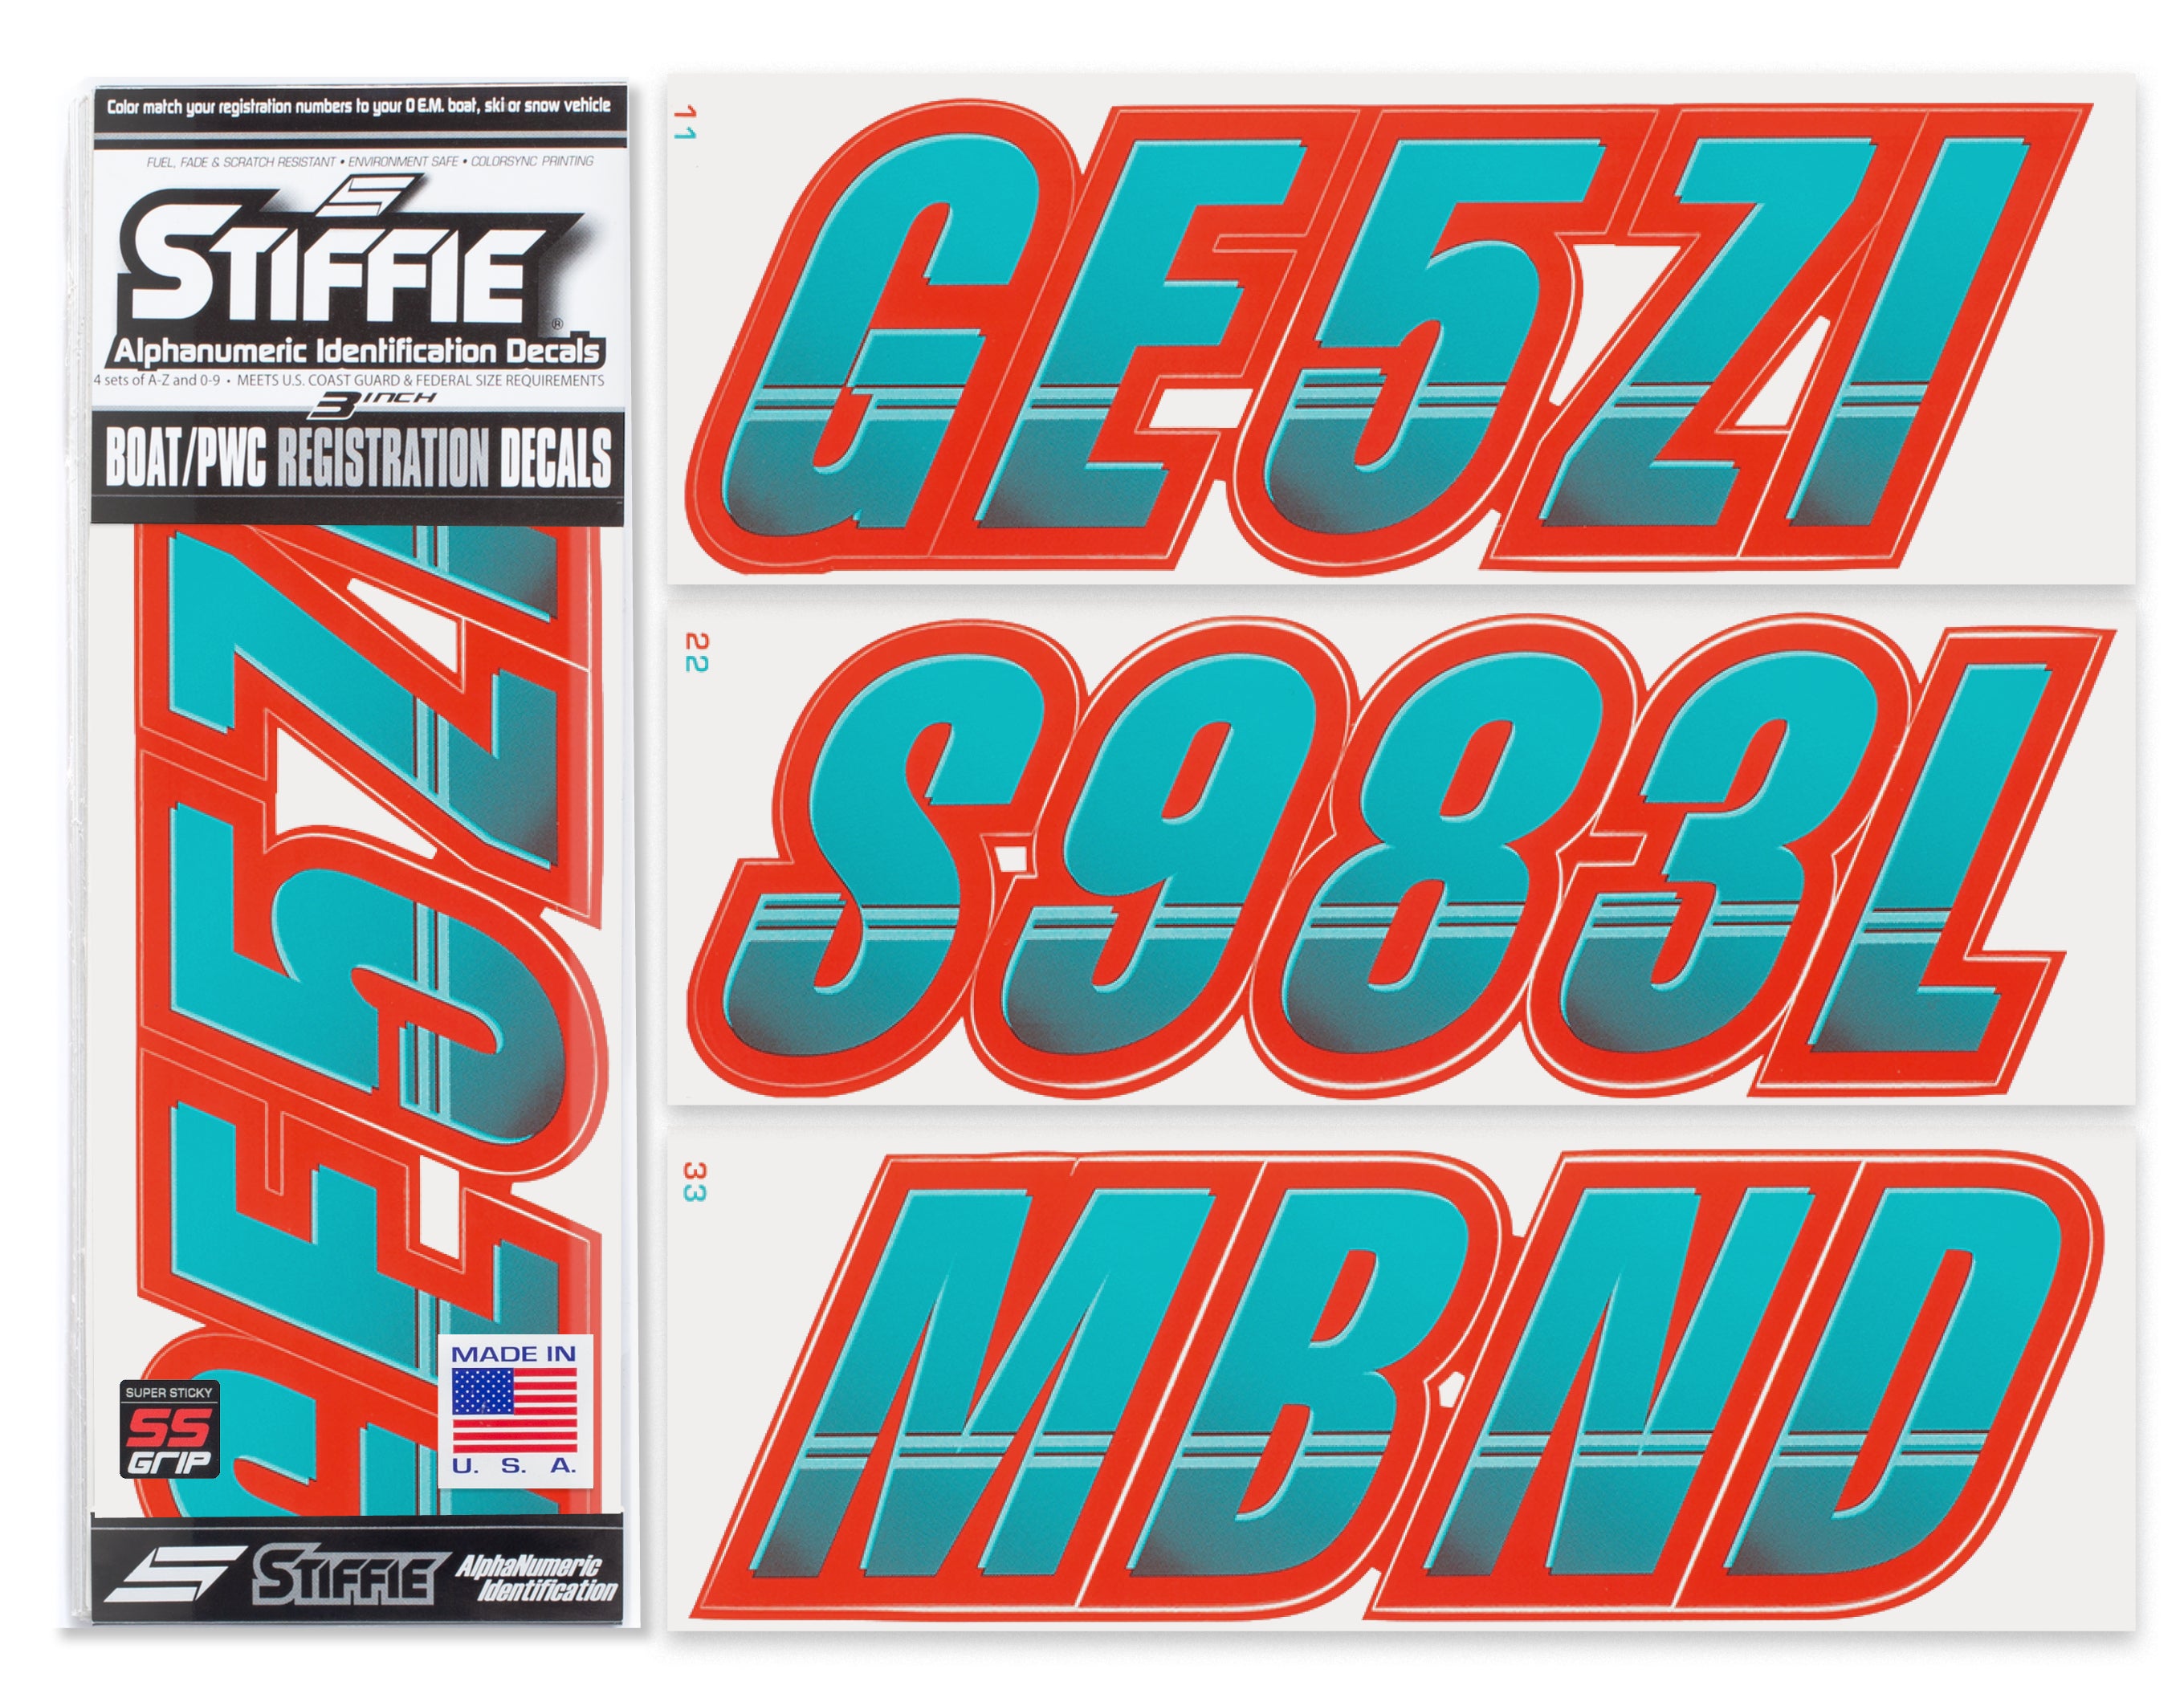 Stiffie Techtron Candy Blue/Lava Red Super Sticky 3" Alpha Numeric Registration Identification Numbers Stickers Decals for Sea-Doo Spark, Inflatable Boats, Ribs, Hypalon/PVC, PWC and Boats.